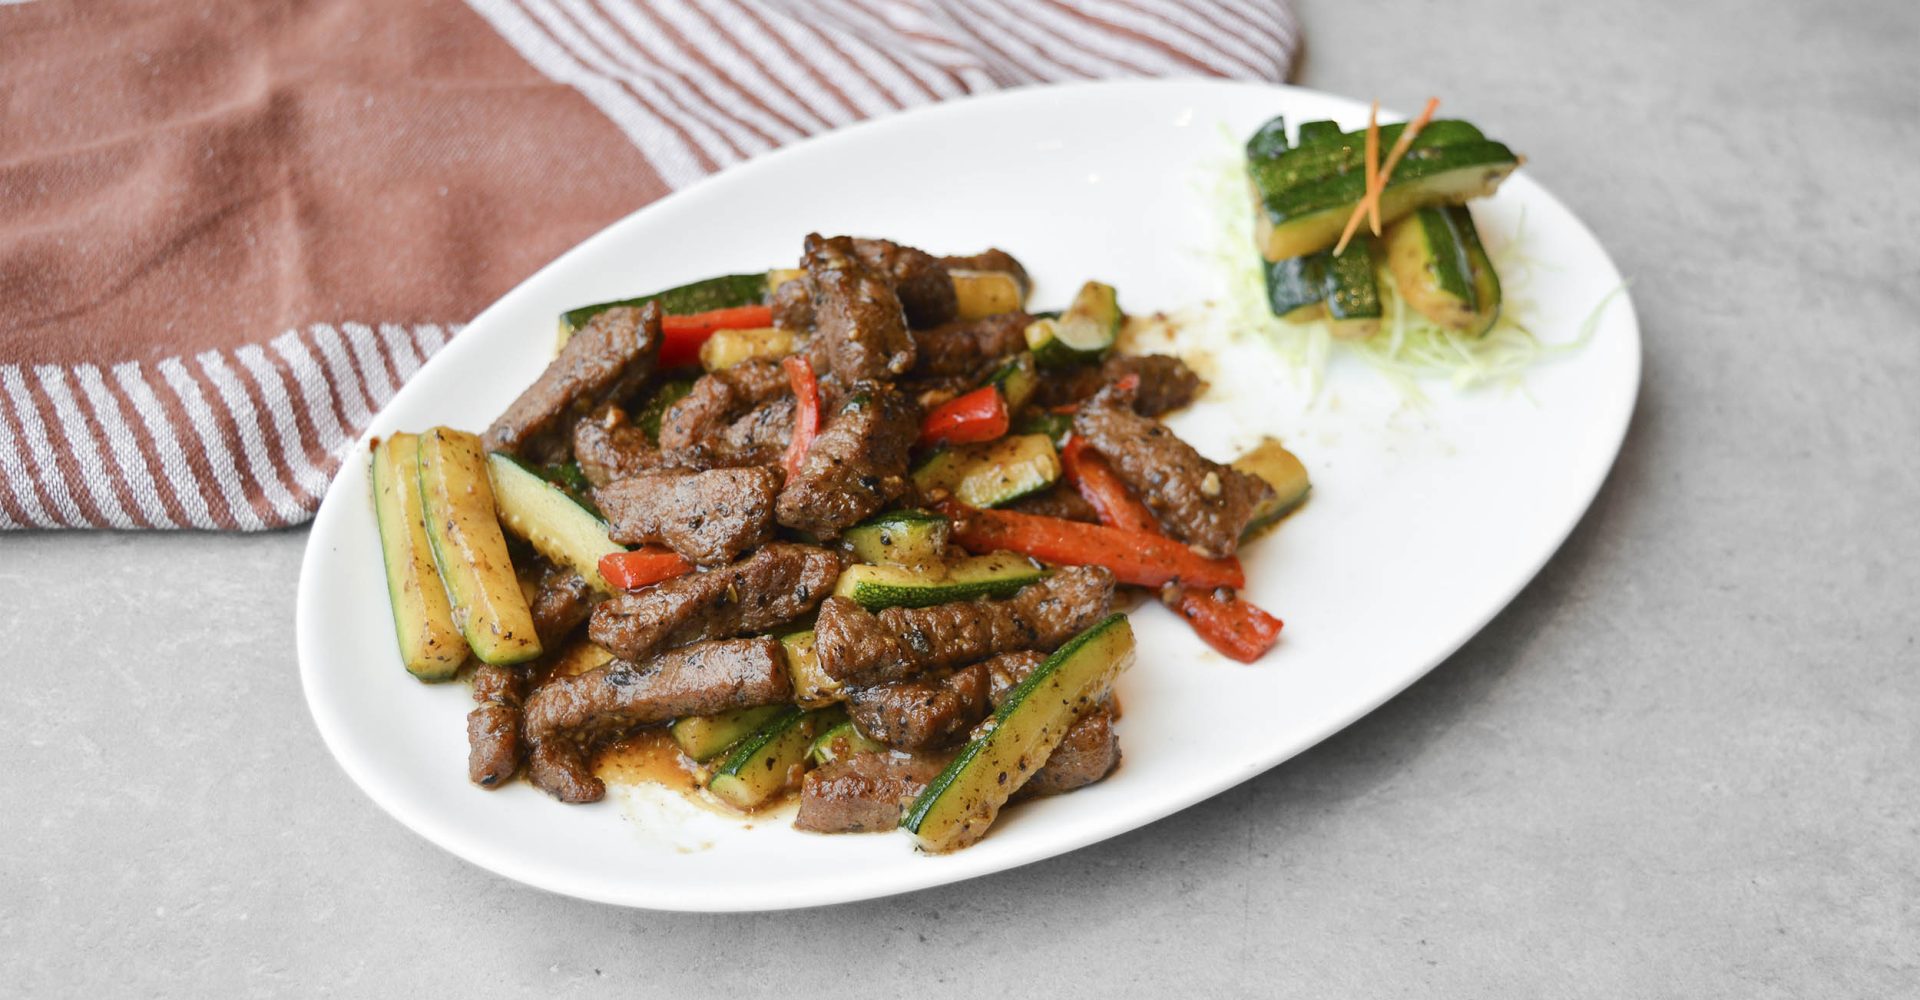 Wok-fried beef fillet with zuccini in truffle sauce